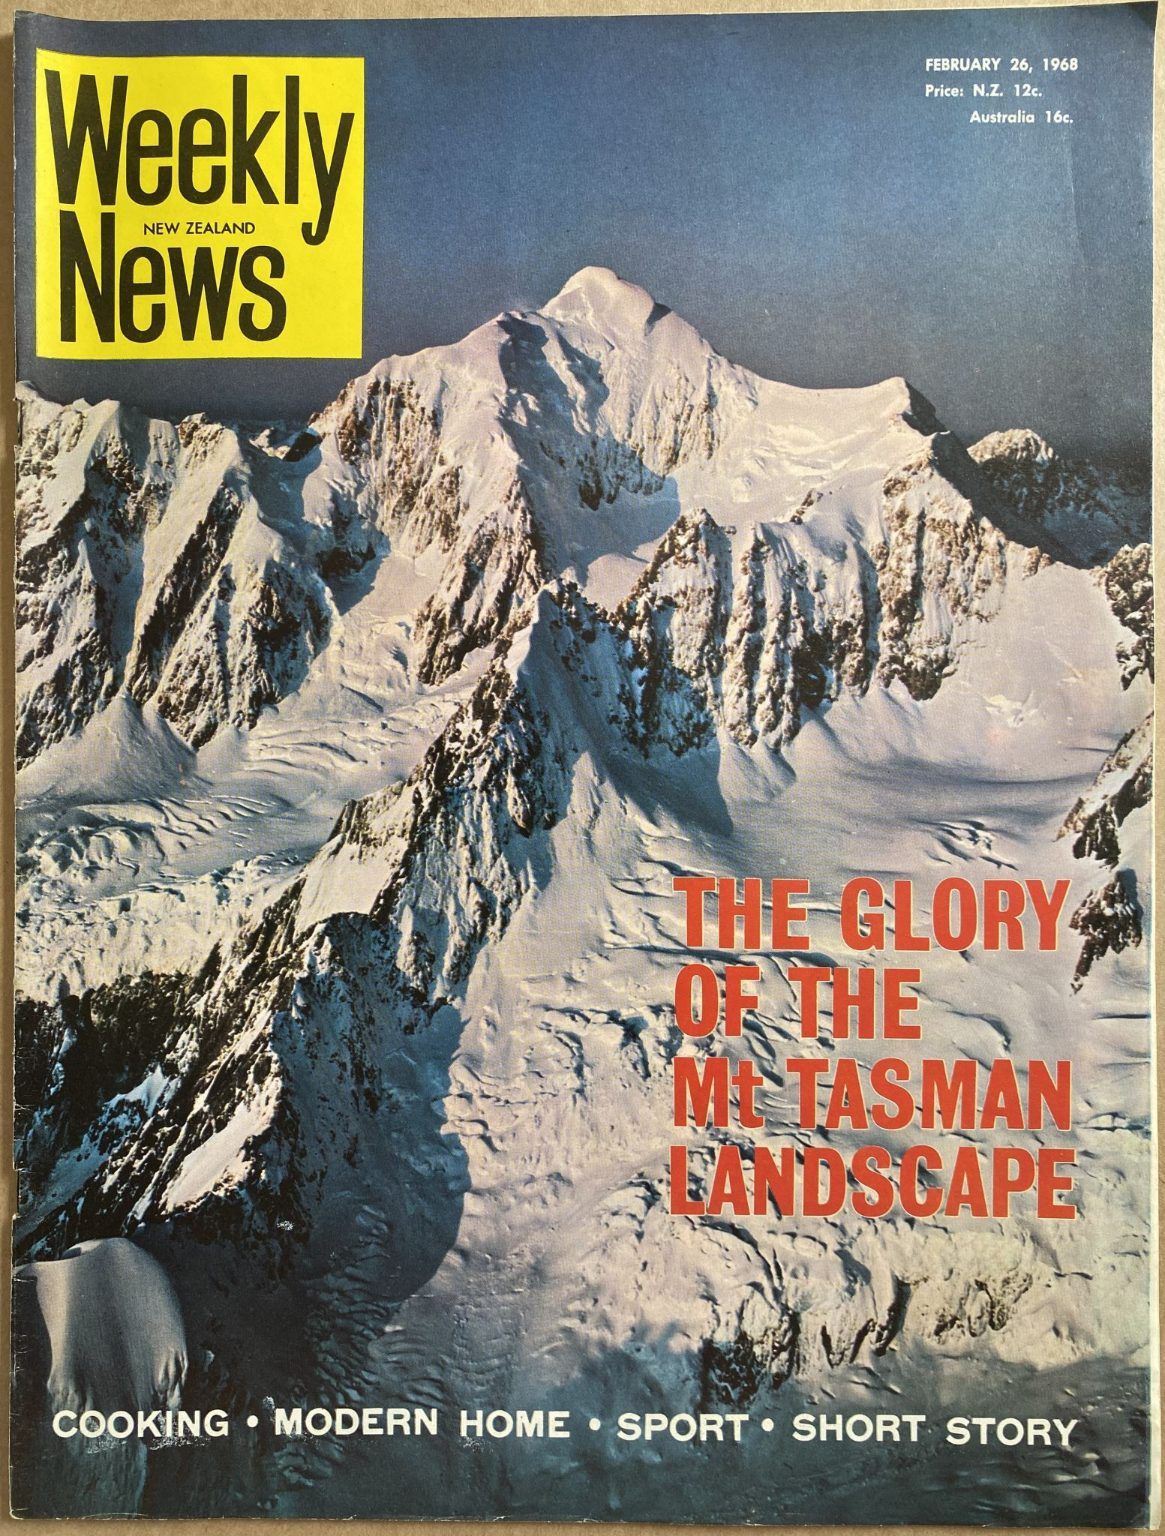 OLD NEWSPAPER: New Zealand Weekly News, No. 5439, 26 February 1968